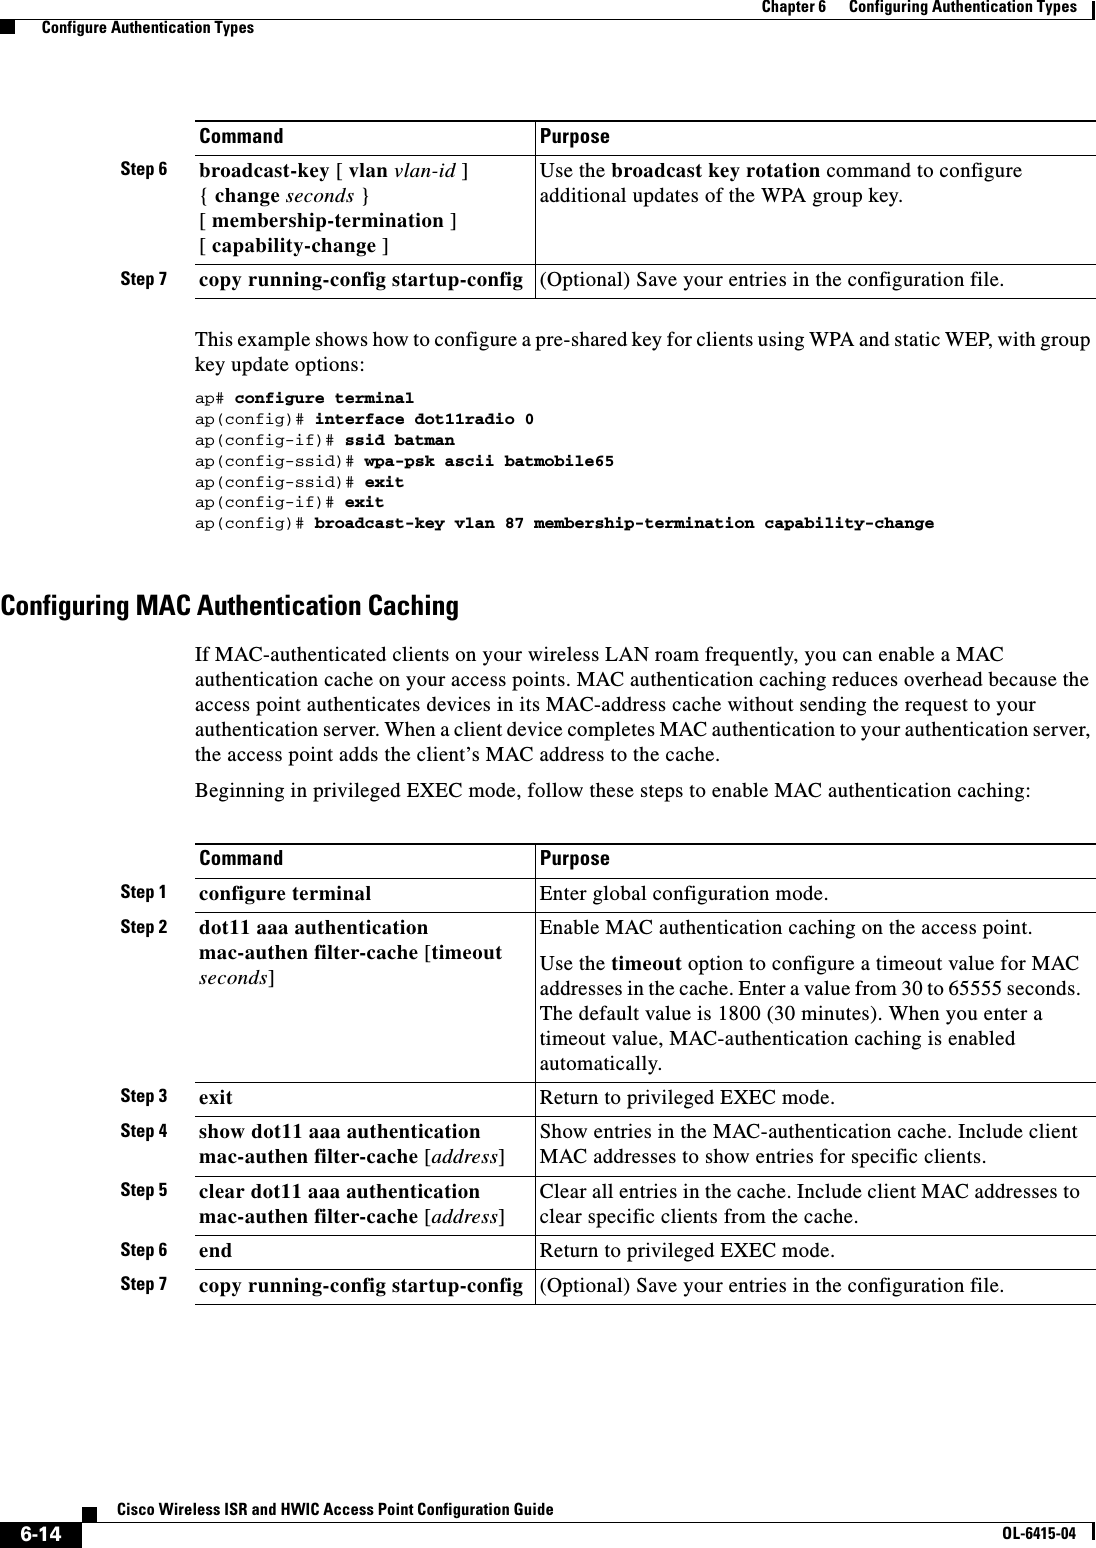 6-14Cisco Wireless ISR and HWIC Access Point Configuration GuideOL-6415-04Chapter 6      Configuring Authentication Types  Configure Authentication TypesThis example shows how to configure a pre-shared key for clients using WPA and static WEP, with group key update options:ap# configure terminalap(config)# interface dot11radio 0ap(config-if)# ssid batmanap(config-ssid)# wpa-psk ascii batmobile65ap(config-ssid)# exitap(config-if)# exitap(config)# broadcast-key vlan 87 membership-termination capability-changeConfiguring MAC Authentication CachingIf MAC-authenticated clients on your wireless LAN roam frequently, you can enable a MAC authentication cache on your access points. MAC authentication caching reduces overhead because the access point authenticates devices in its MAC-address cache without sending the request to your authentication server. When a client device completes MAC authentication to your authentication server, the access point adds the client’s MAC address to the cache.Beginning in privileged EXEC mode, follow these steps to enable MAC authentication caching:Step 6 broadcast-key [ vlan vlan-id ]  { change seconds }  [ membership-termination ] [ capability-change ]Use the broadcast key rotation command to configure additional updates of the WPA group key.Step 7 copy running-config startup-config (Optional) Save your entries in the configuration file.Command PurposeCommand PurposeStep 1 configure terminal Enter global configuration mode.Step 2 dot11 aaa authentication mac-authen filter-cache [timeout seconds]Enable MAC authentication caching on the access point.Use the timeout option to configure a timeout value for MAC addresses in the cache. Enter a value from 30 to 65555 seconds. The default value is 1800 (30 minutes). When you enter a timeout value, MAC-authentication caching is enabled automatically.Step 3 exit Return to privileged EXEC mode. Step 4 show dot11 aaa authentication mac-authen filter-cache [address]Show entries in the MAC-authentication cache. Include client MAC addresses to show entries for specific clients.Step 5 clear dot11 aaa authentication mac-authen filter-cache [address]Clear all entries in the cache. Include client MAC addresses to clear specific clients from the cache.Step 6 end Return to privileged EXEC mode.Step 7 copy running-config startup-config (Optional) Save your entries in the configuration file.